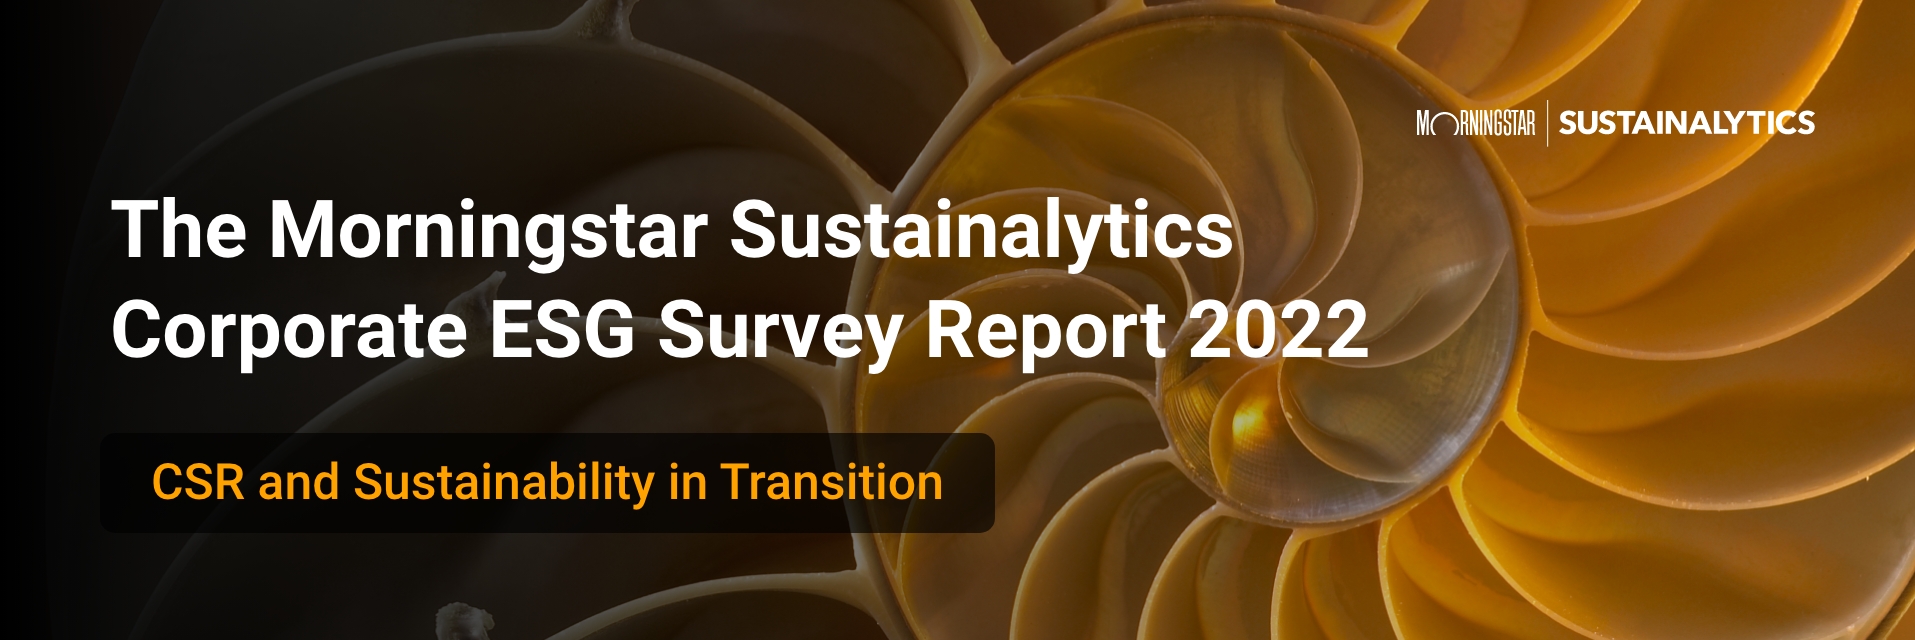 Download the Special EMEA Supplement to The Morningstar Sustainalytics Corporate ESG Survey Report 2022